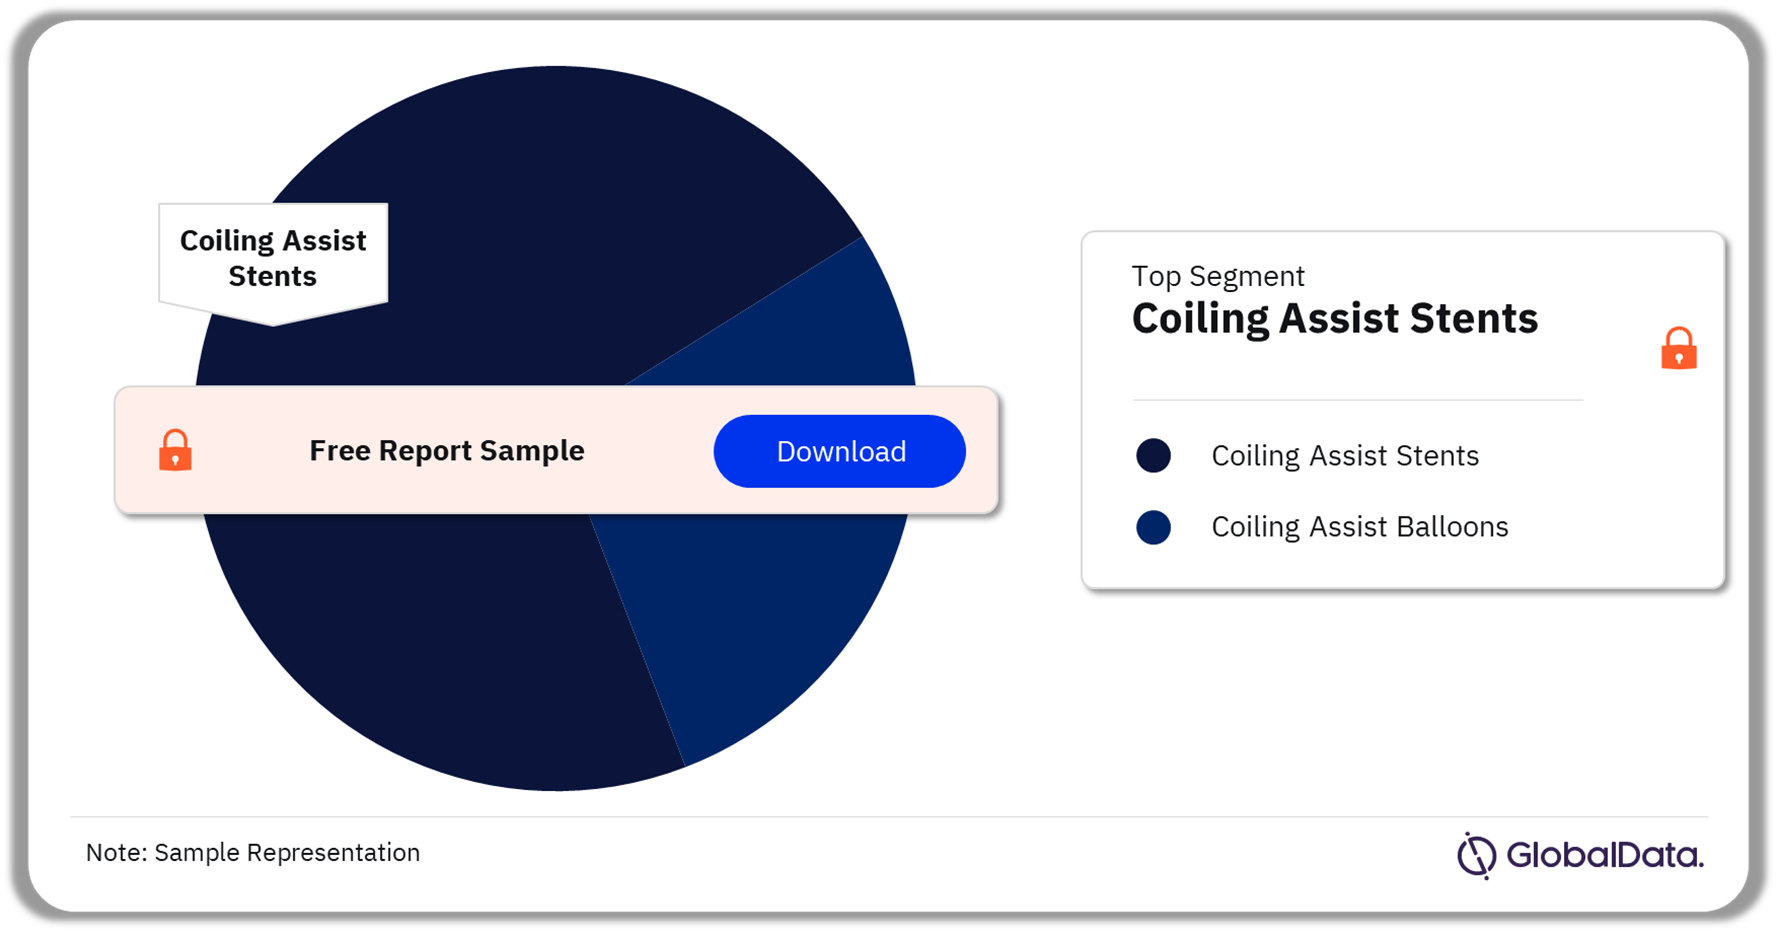 Neurovascular Coiling Assist Devices Market Analysis by Segments, 2023 (%)